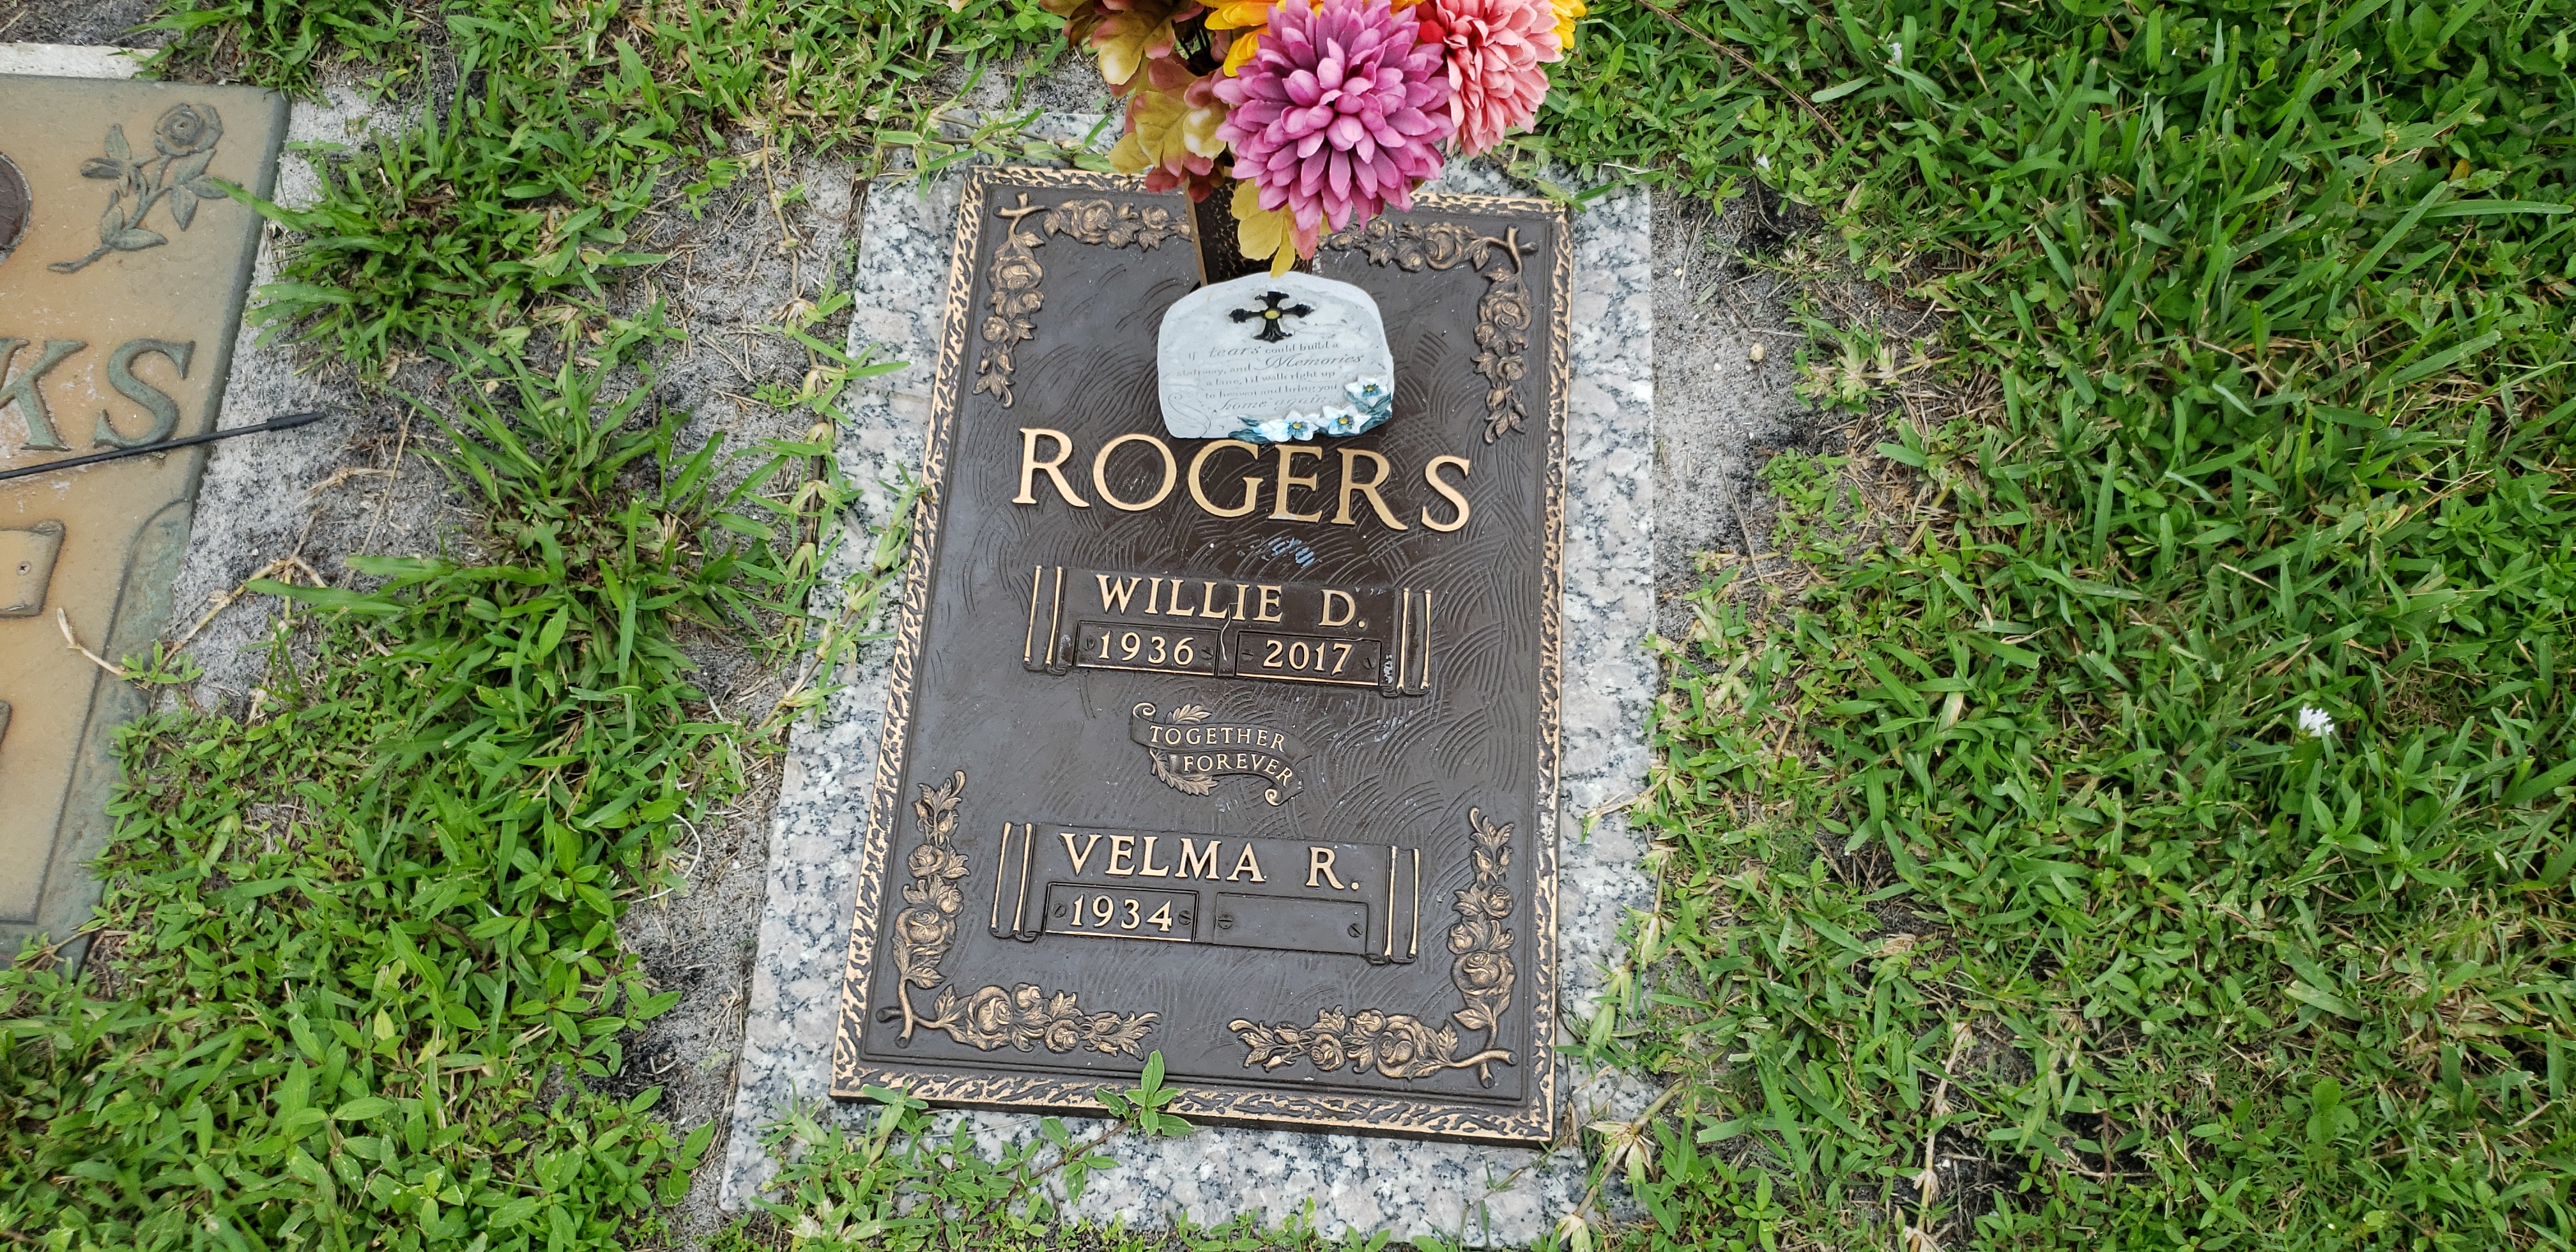 Willie D Rogers